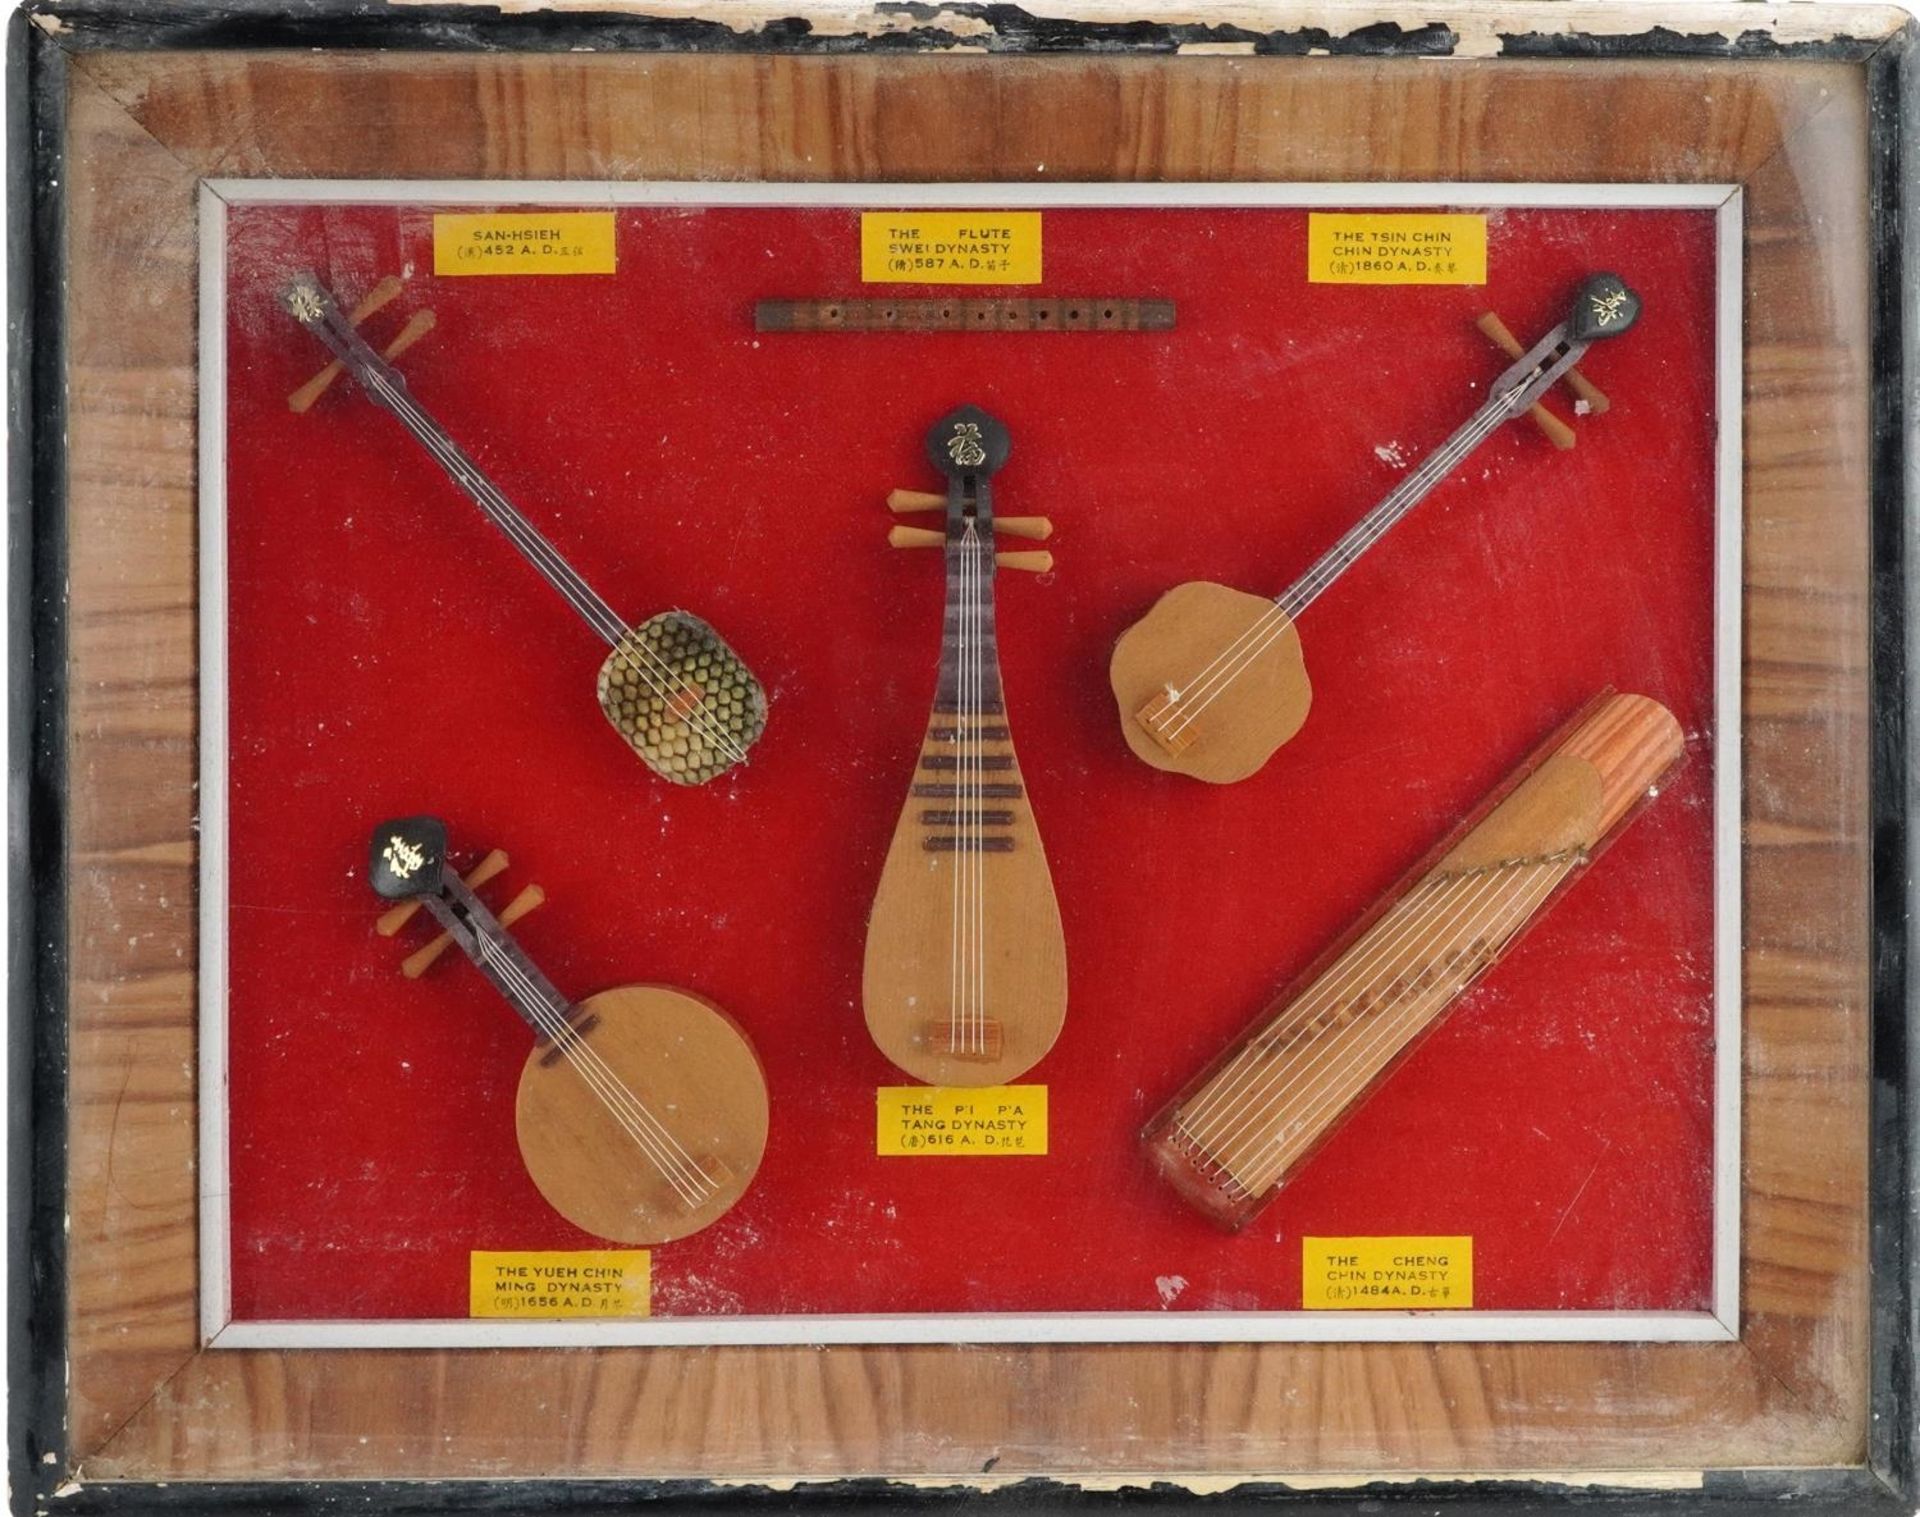 Glazed diorama of Chinese musical instruments including San-hseieh and Swei Dynasty flute, overall - Image 2 of 3